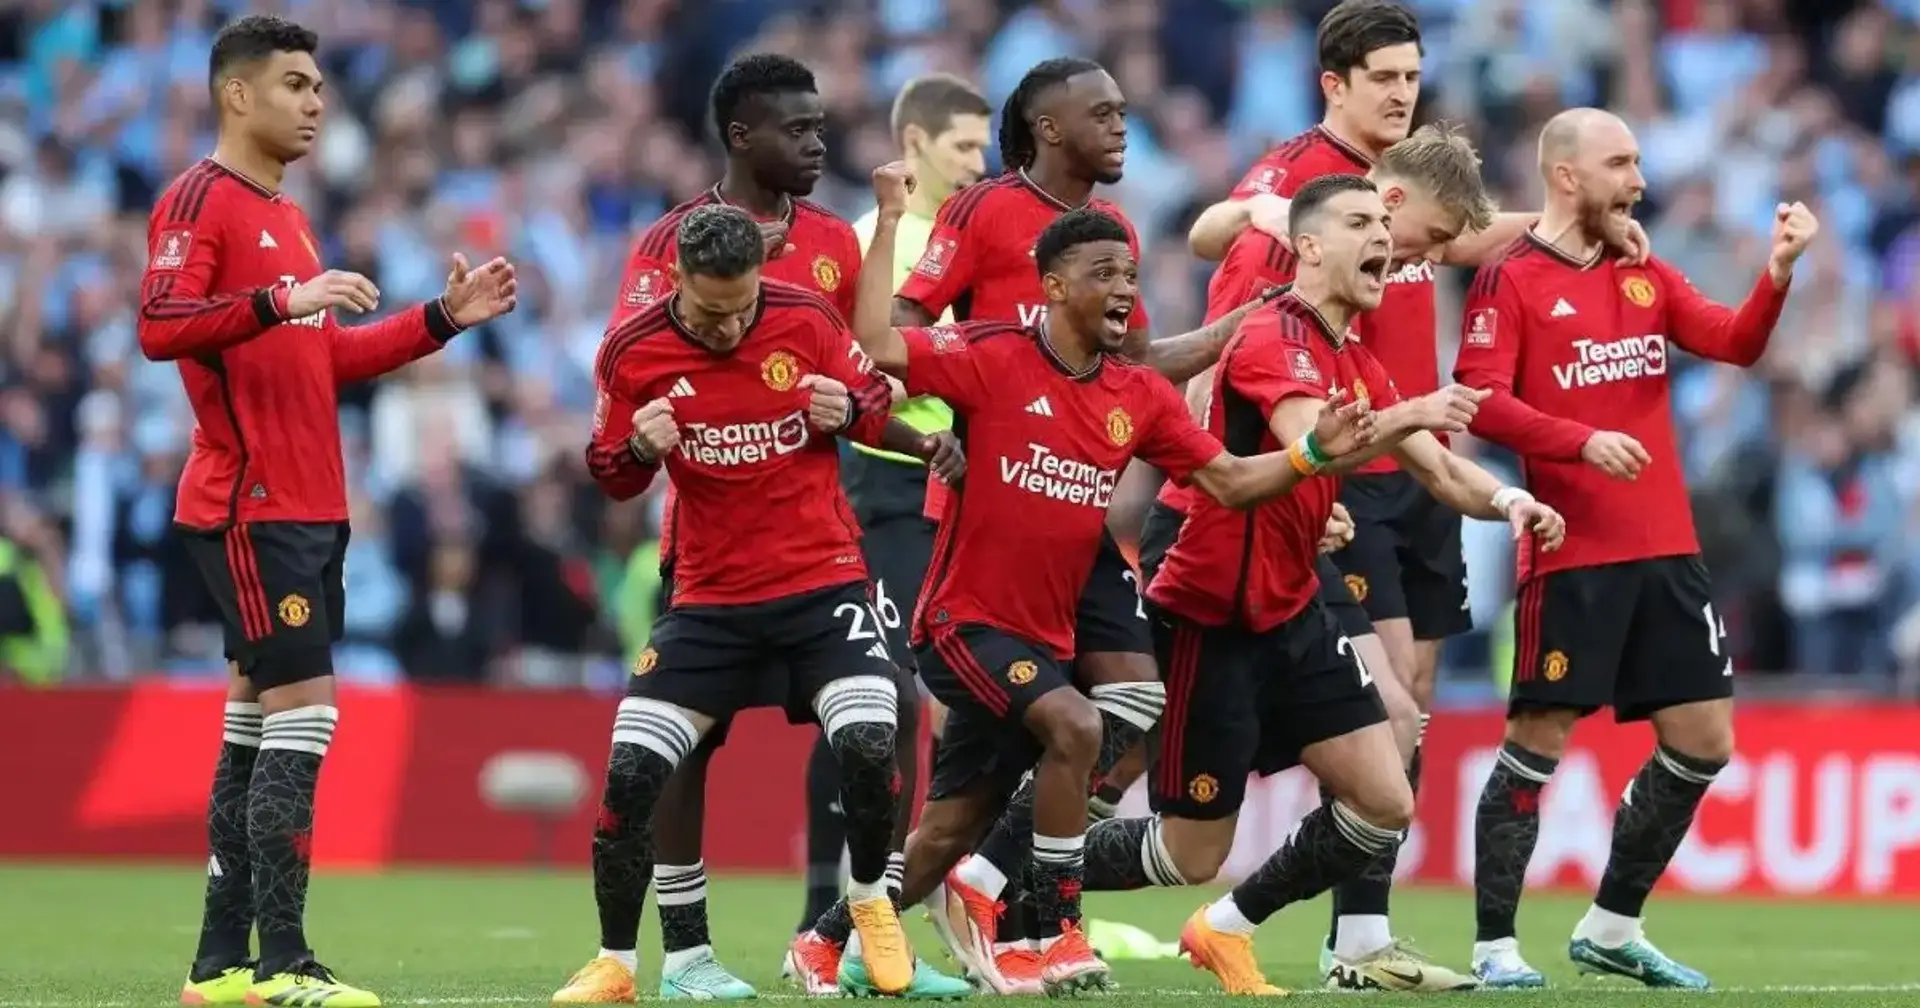 Are Man United one of most entertaining teams in the league as claimed by Ten Hag?